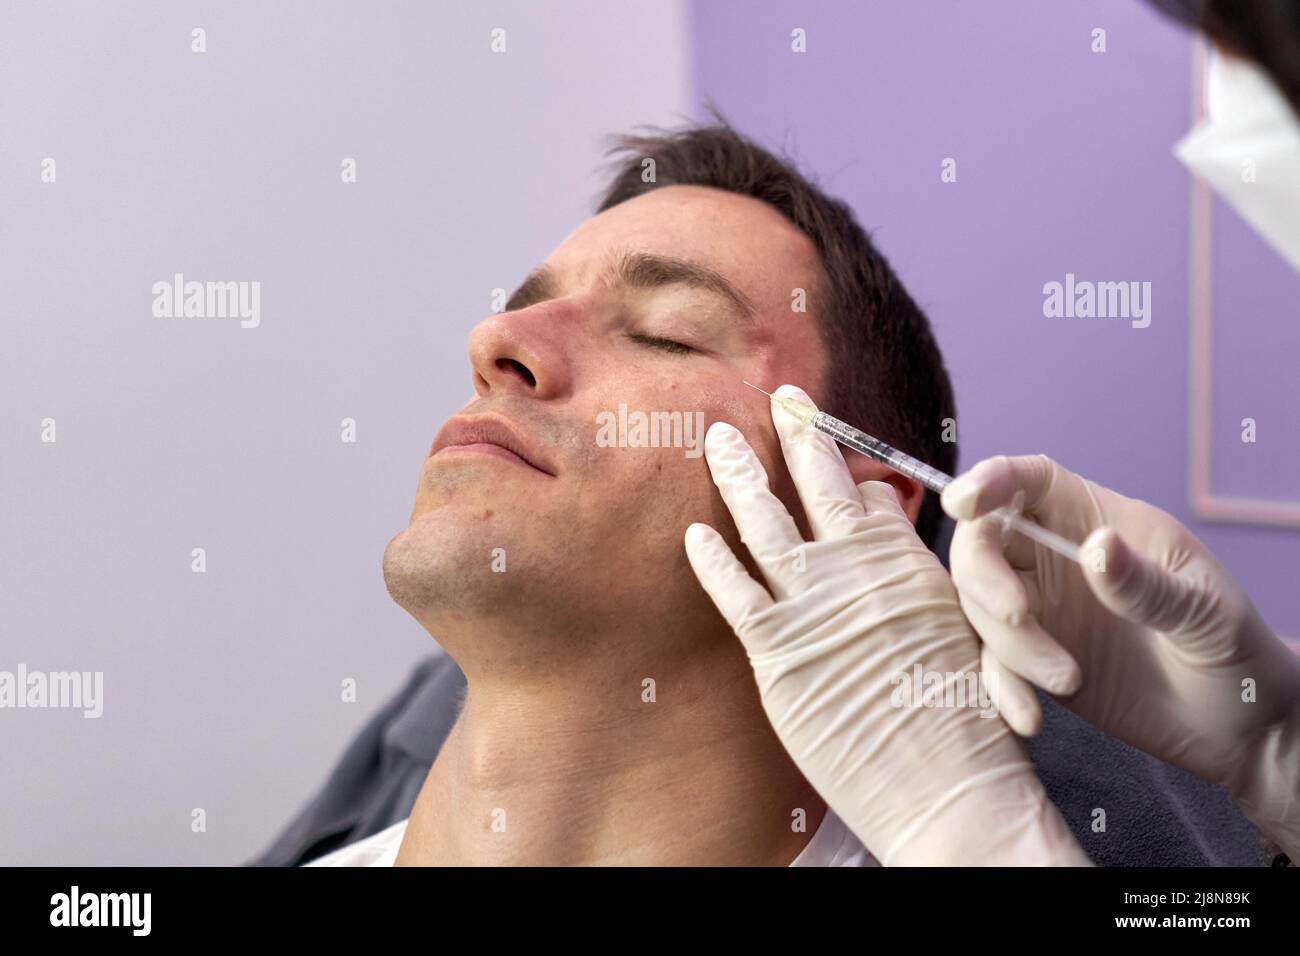 Patient relaxed while getting a rejuvenation treatment with botox injection Stock Photo